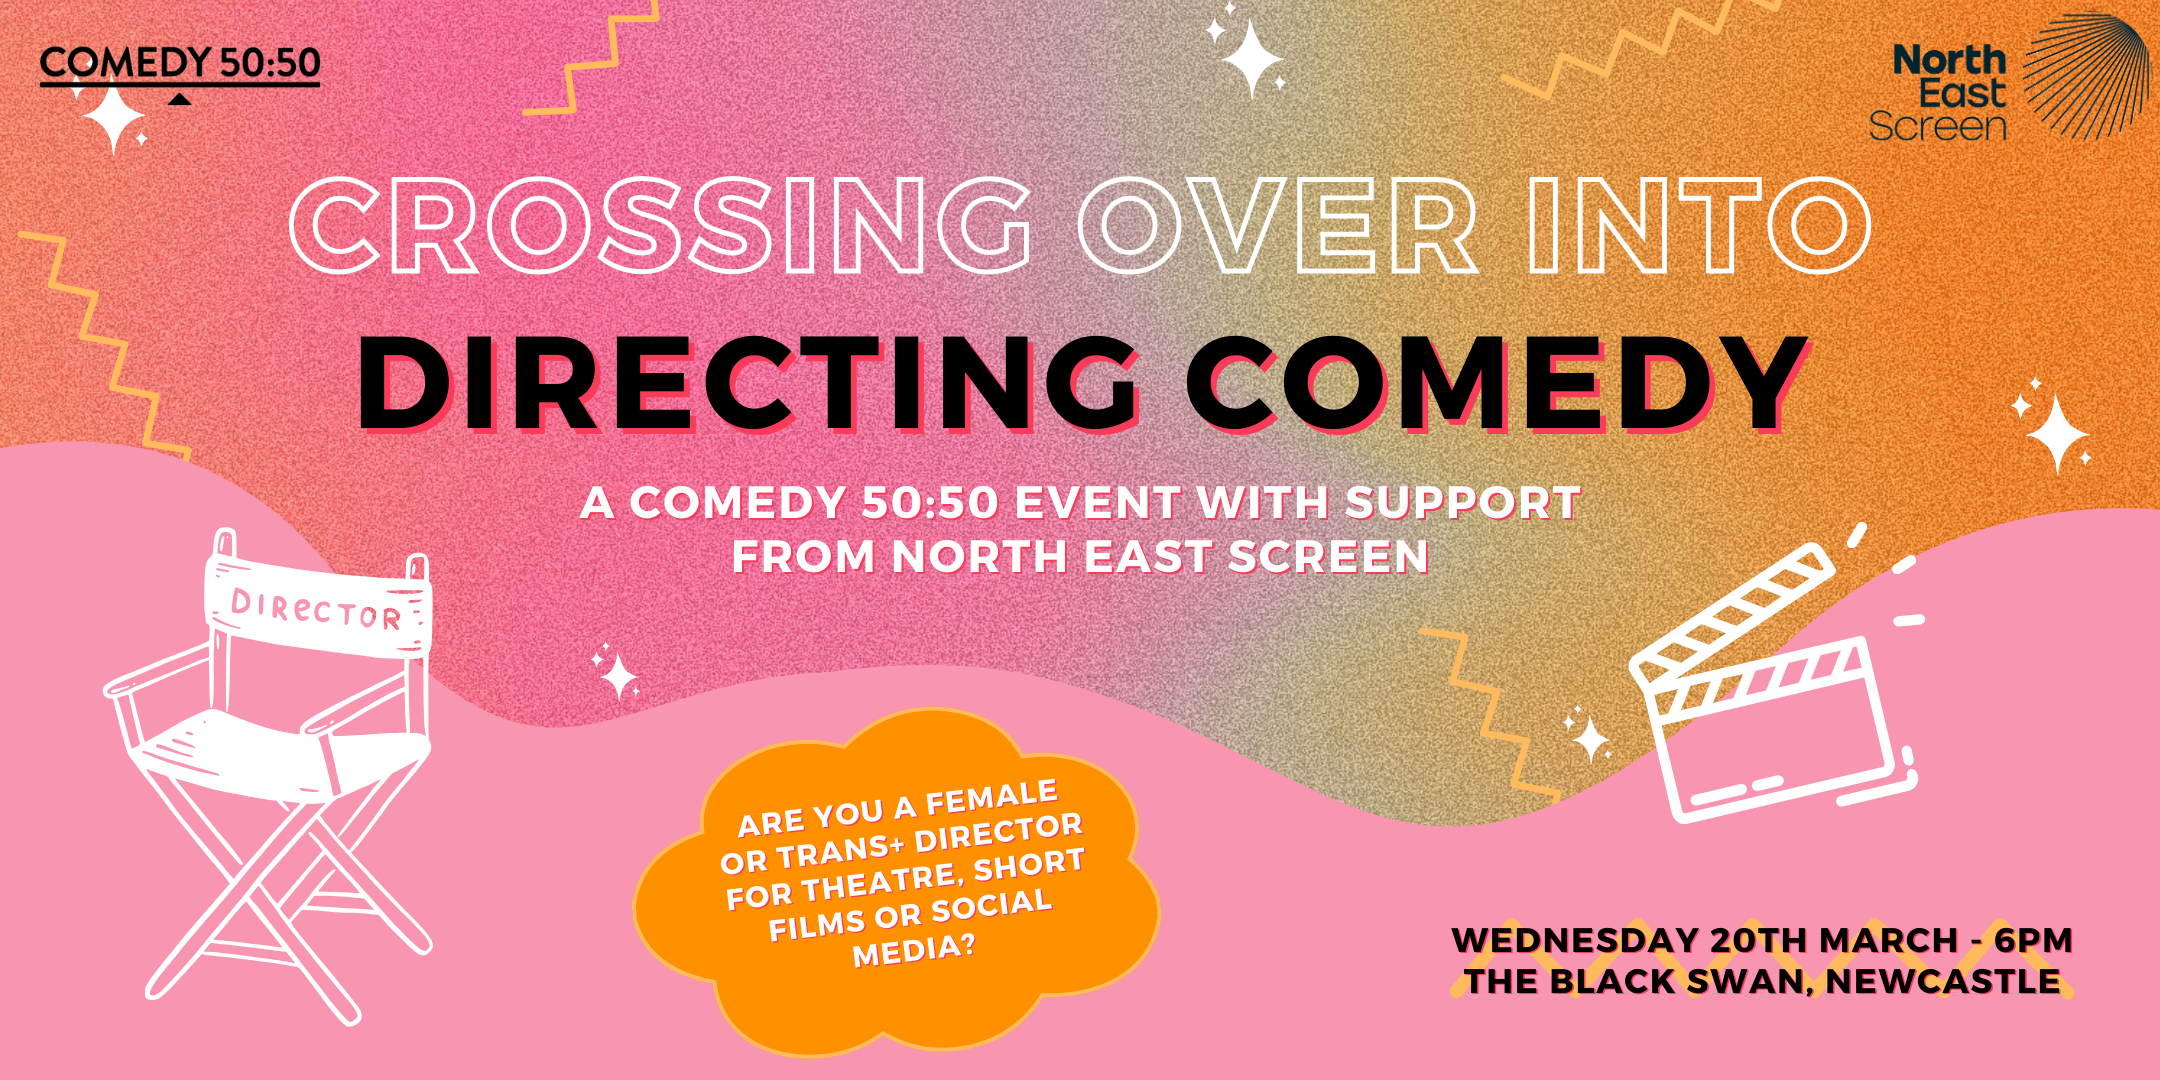 Crossing over into Directing Comedy with Comedy 50:50